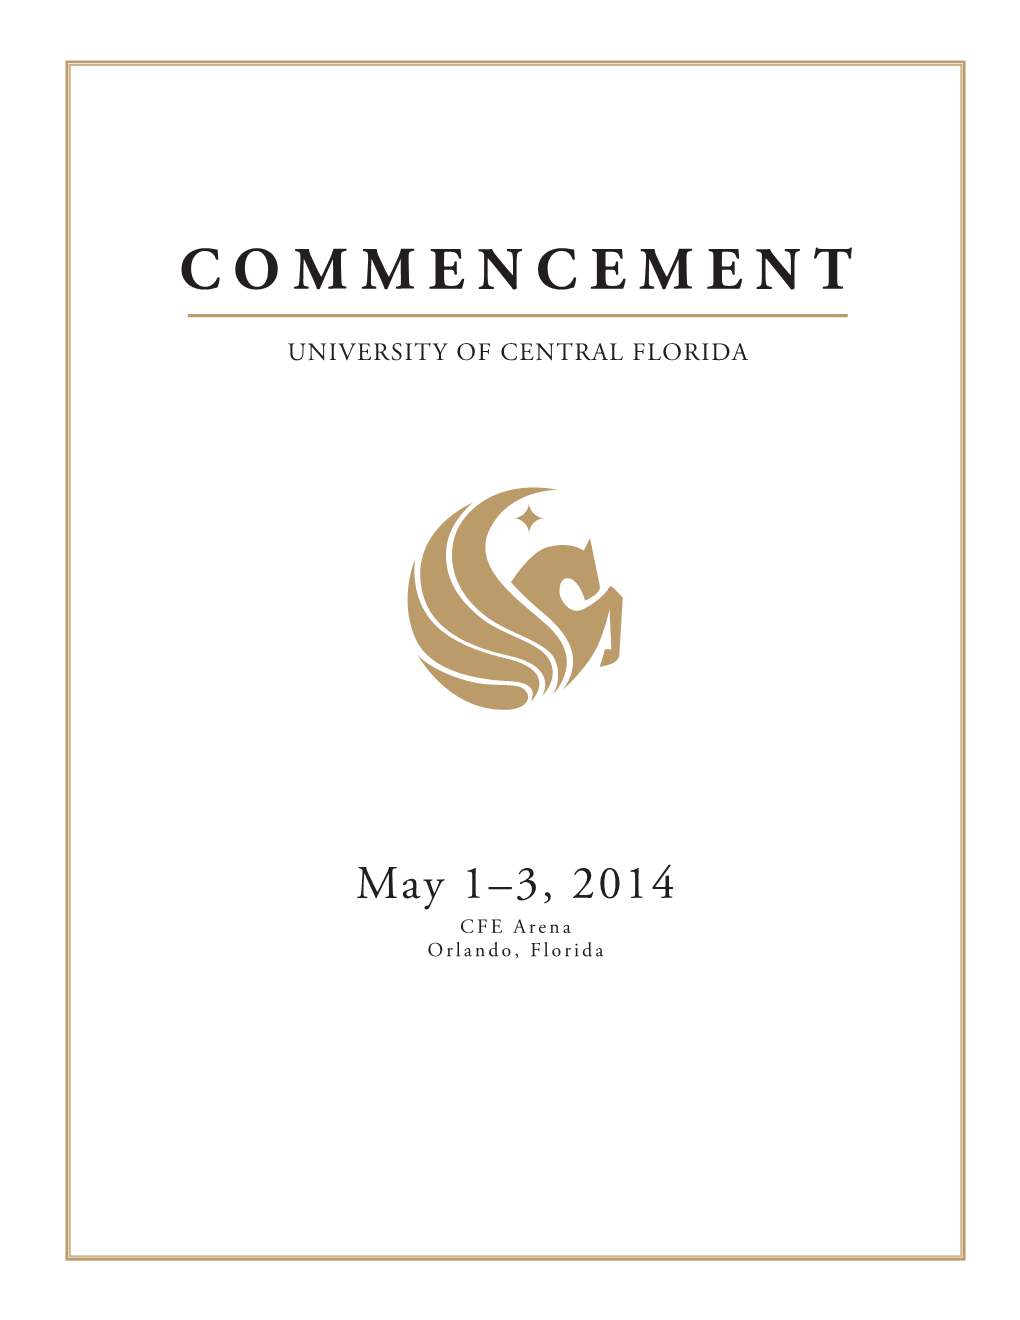 Commencement Program Will Be Available at for Download As a PDF Beginning Monday, May 5, 2014